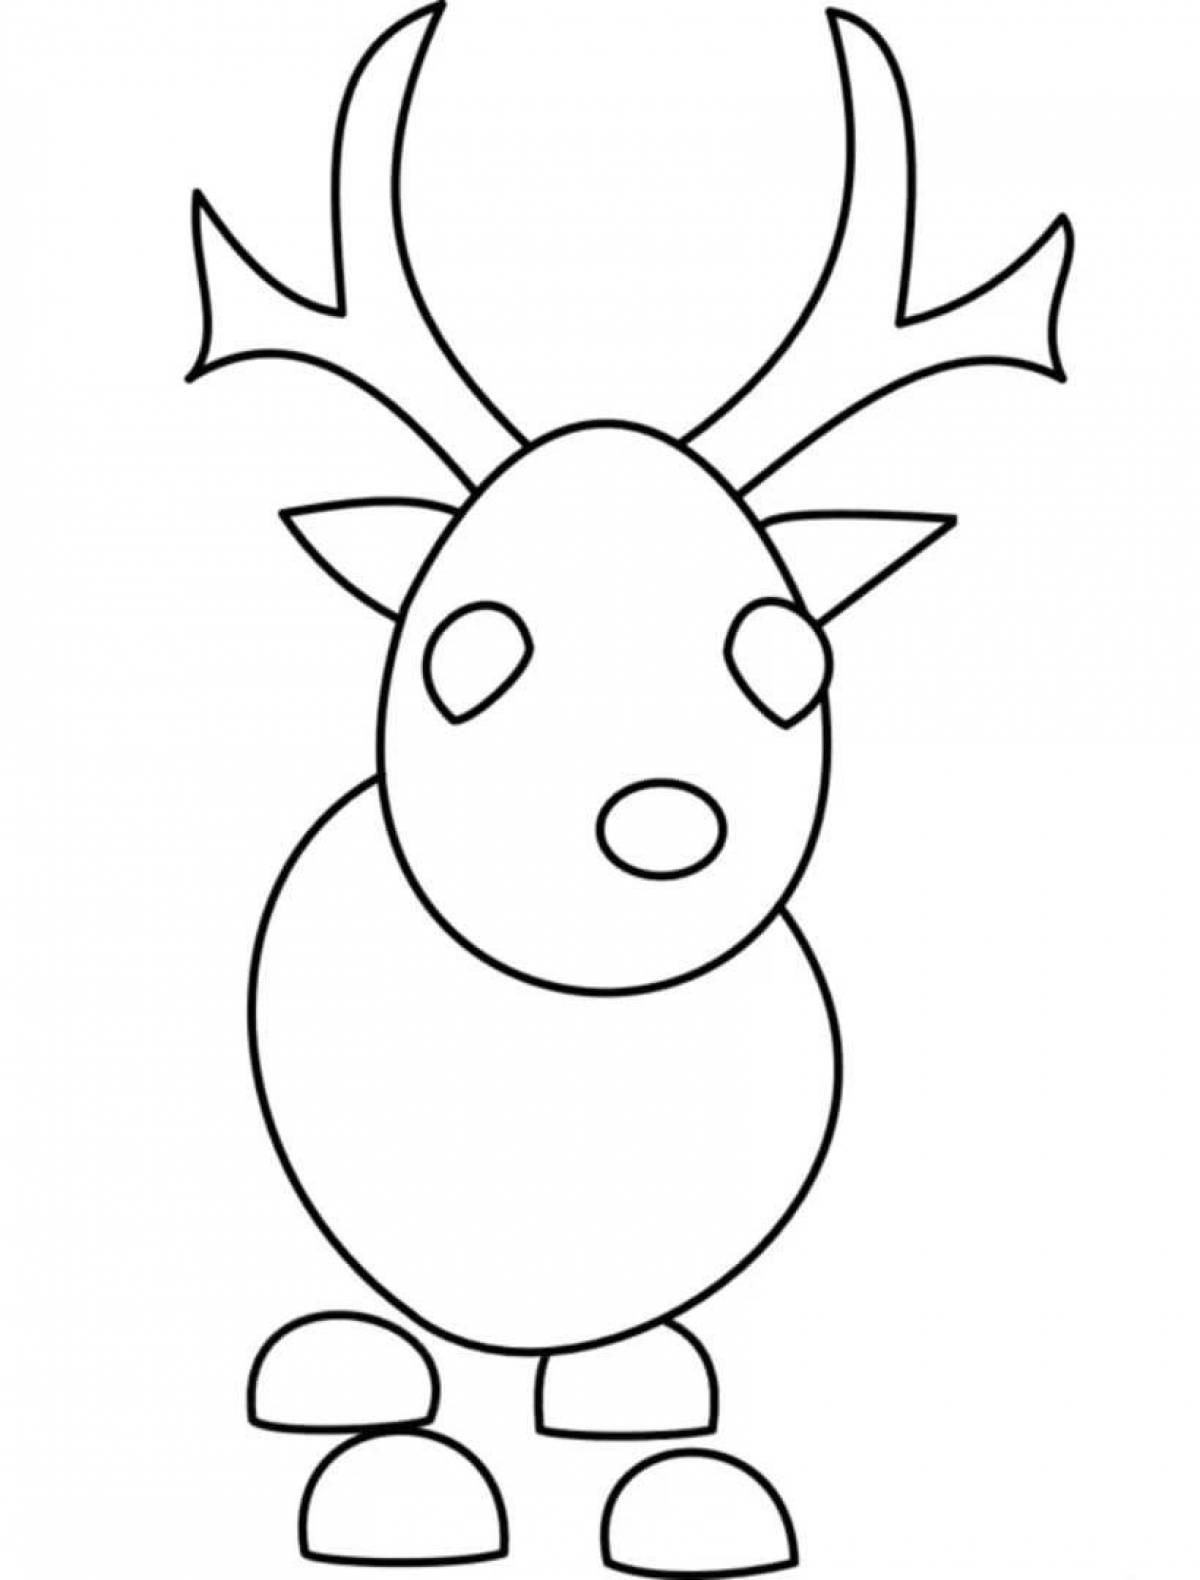 Sparkling egg adopt me egg coloring page